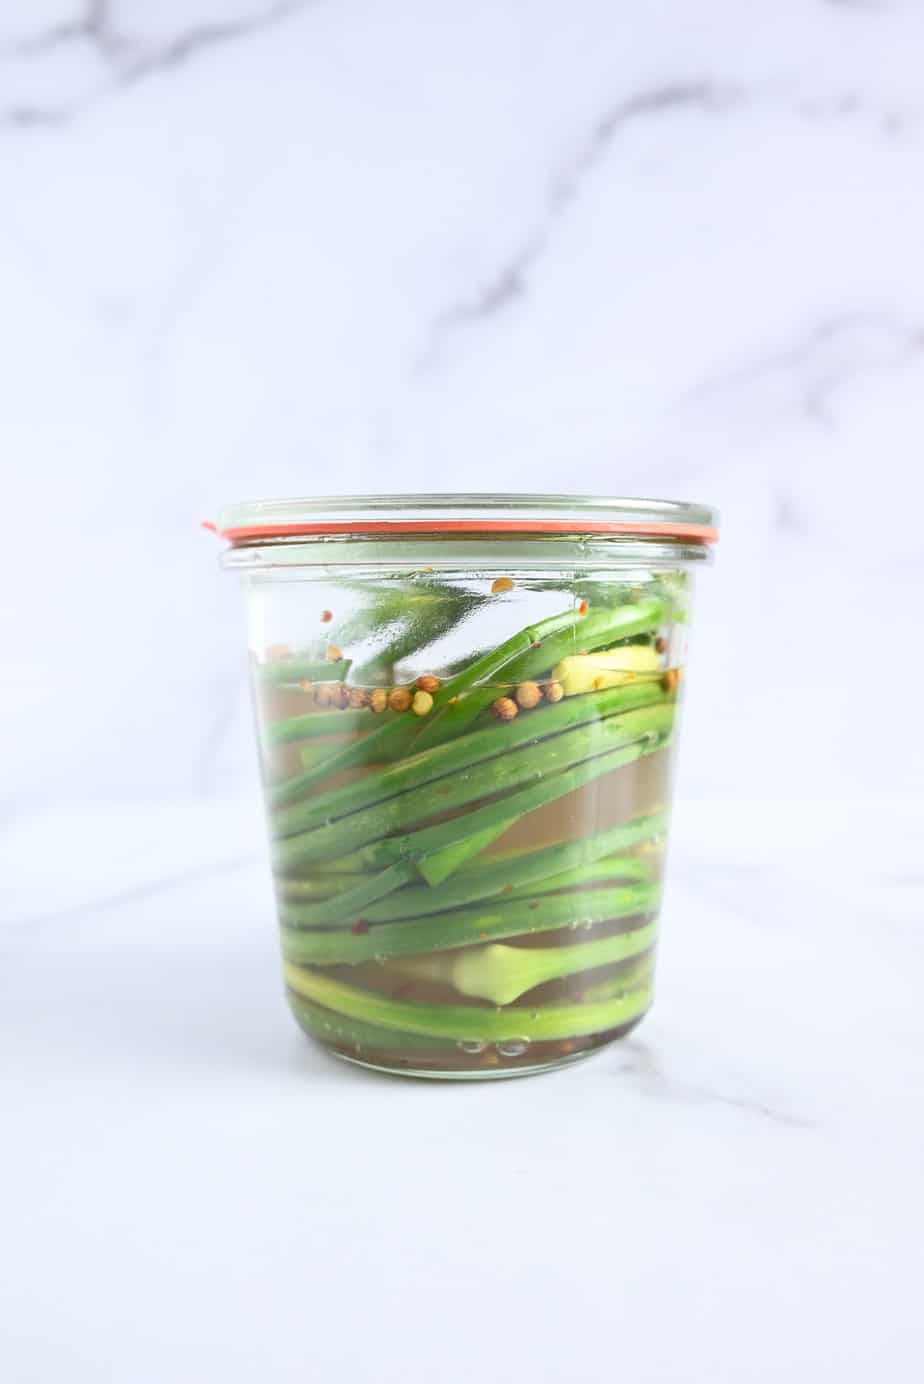 Fresh garlic scapes in a glass jar with brine poured over them.